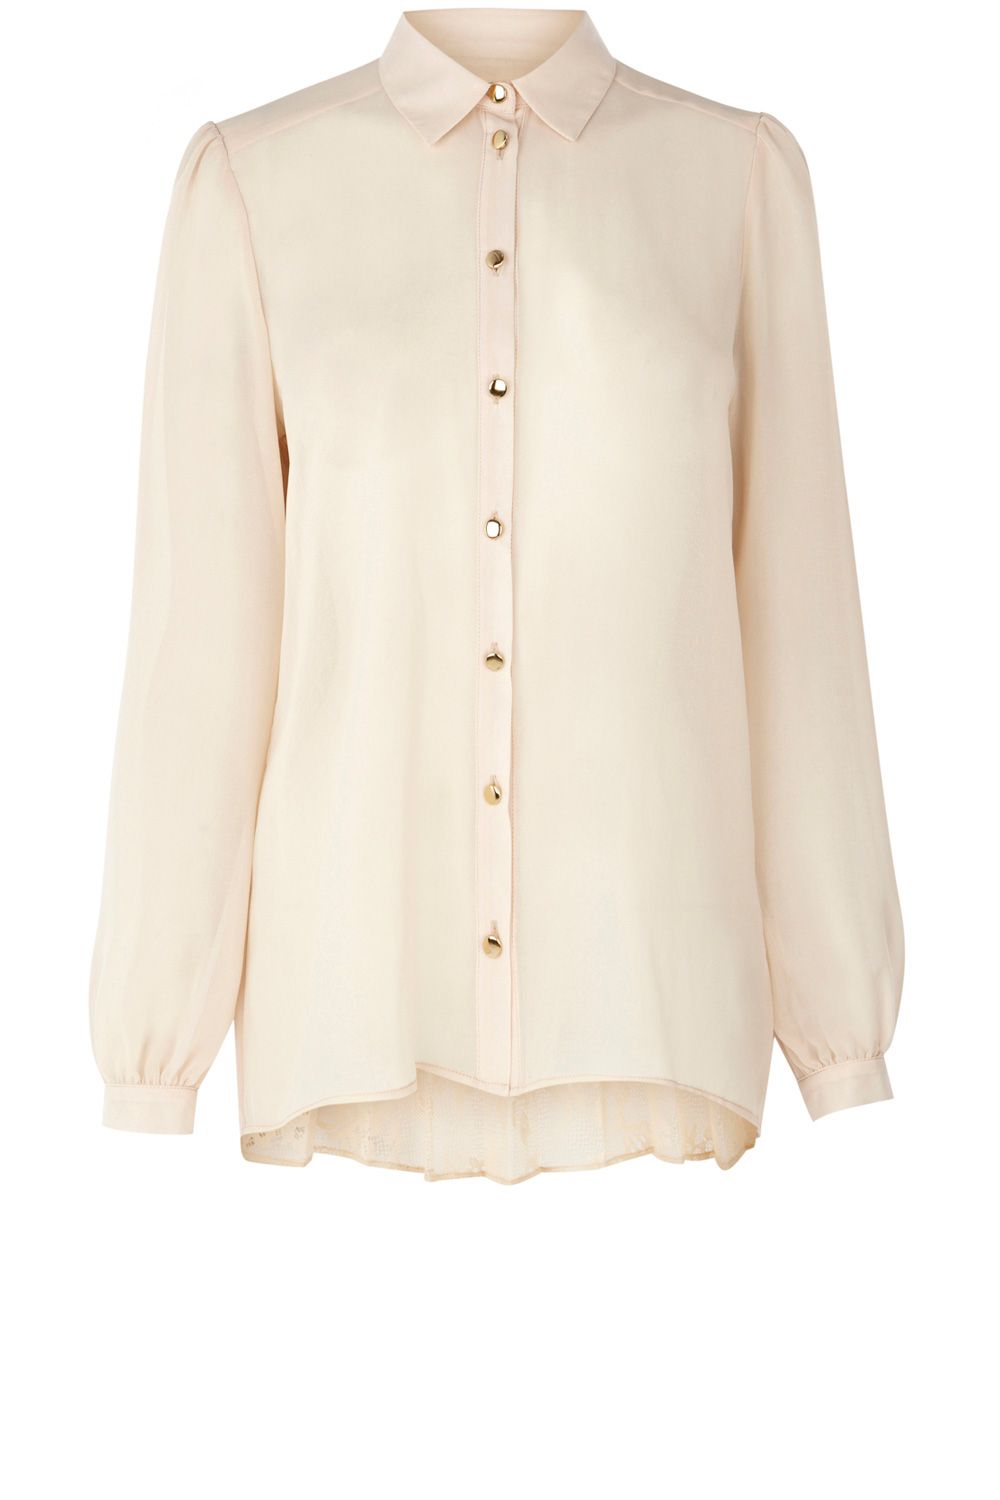 Oasis Lace Pleat Back Chiffon Blouse in Natural | Lyst